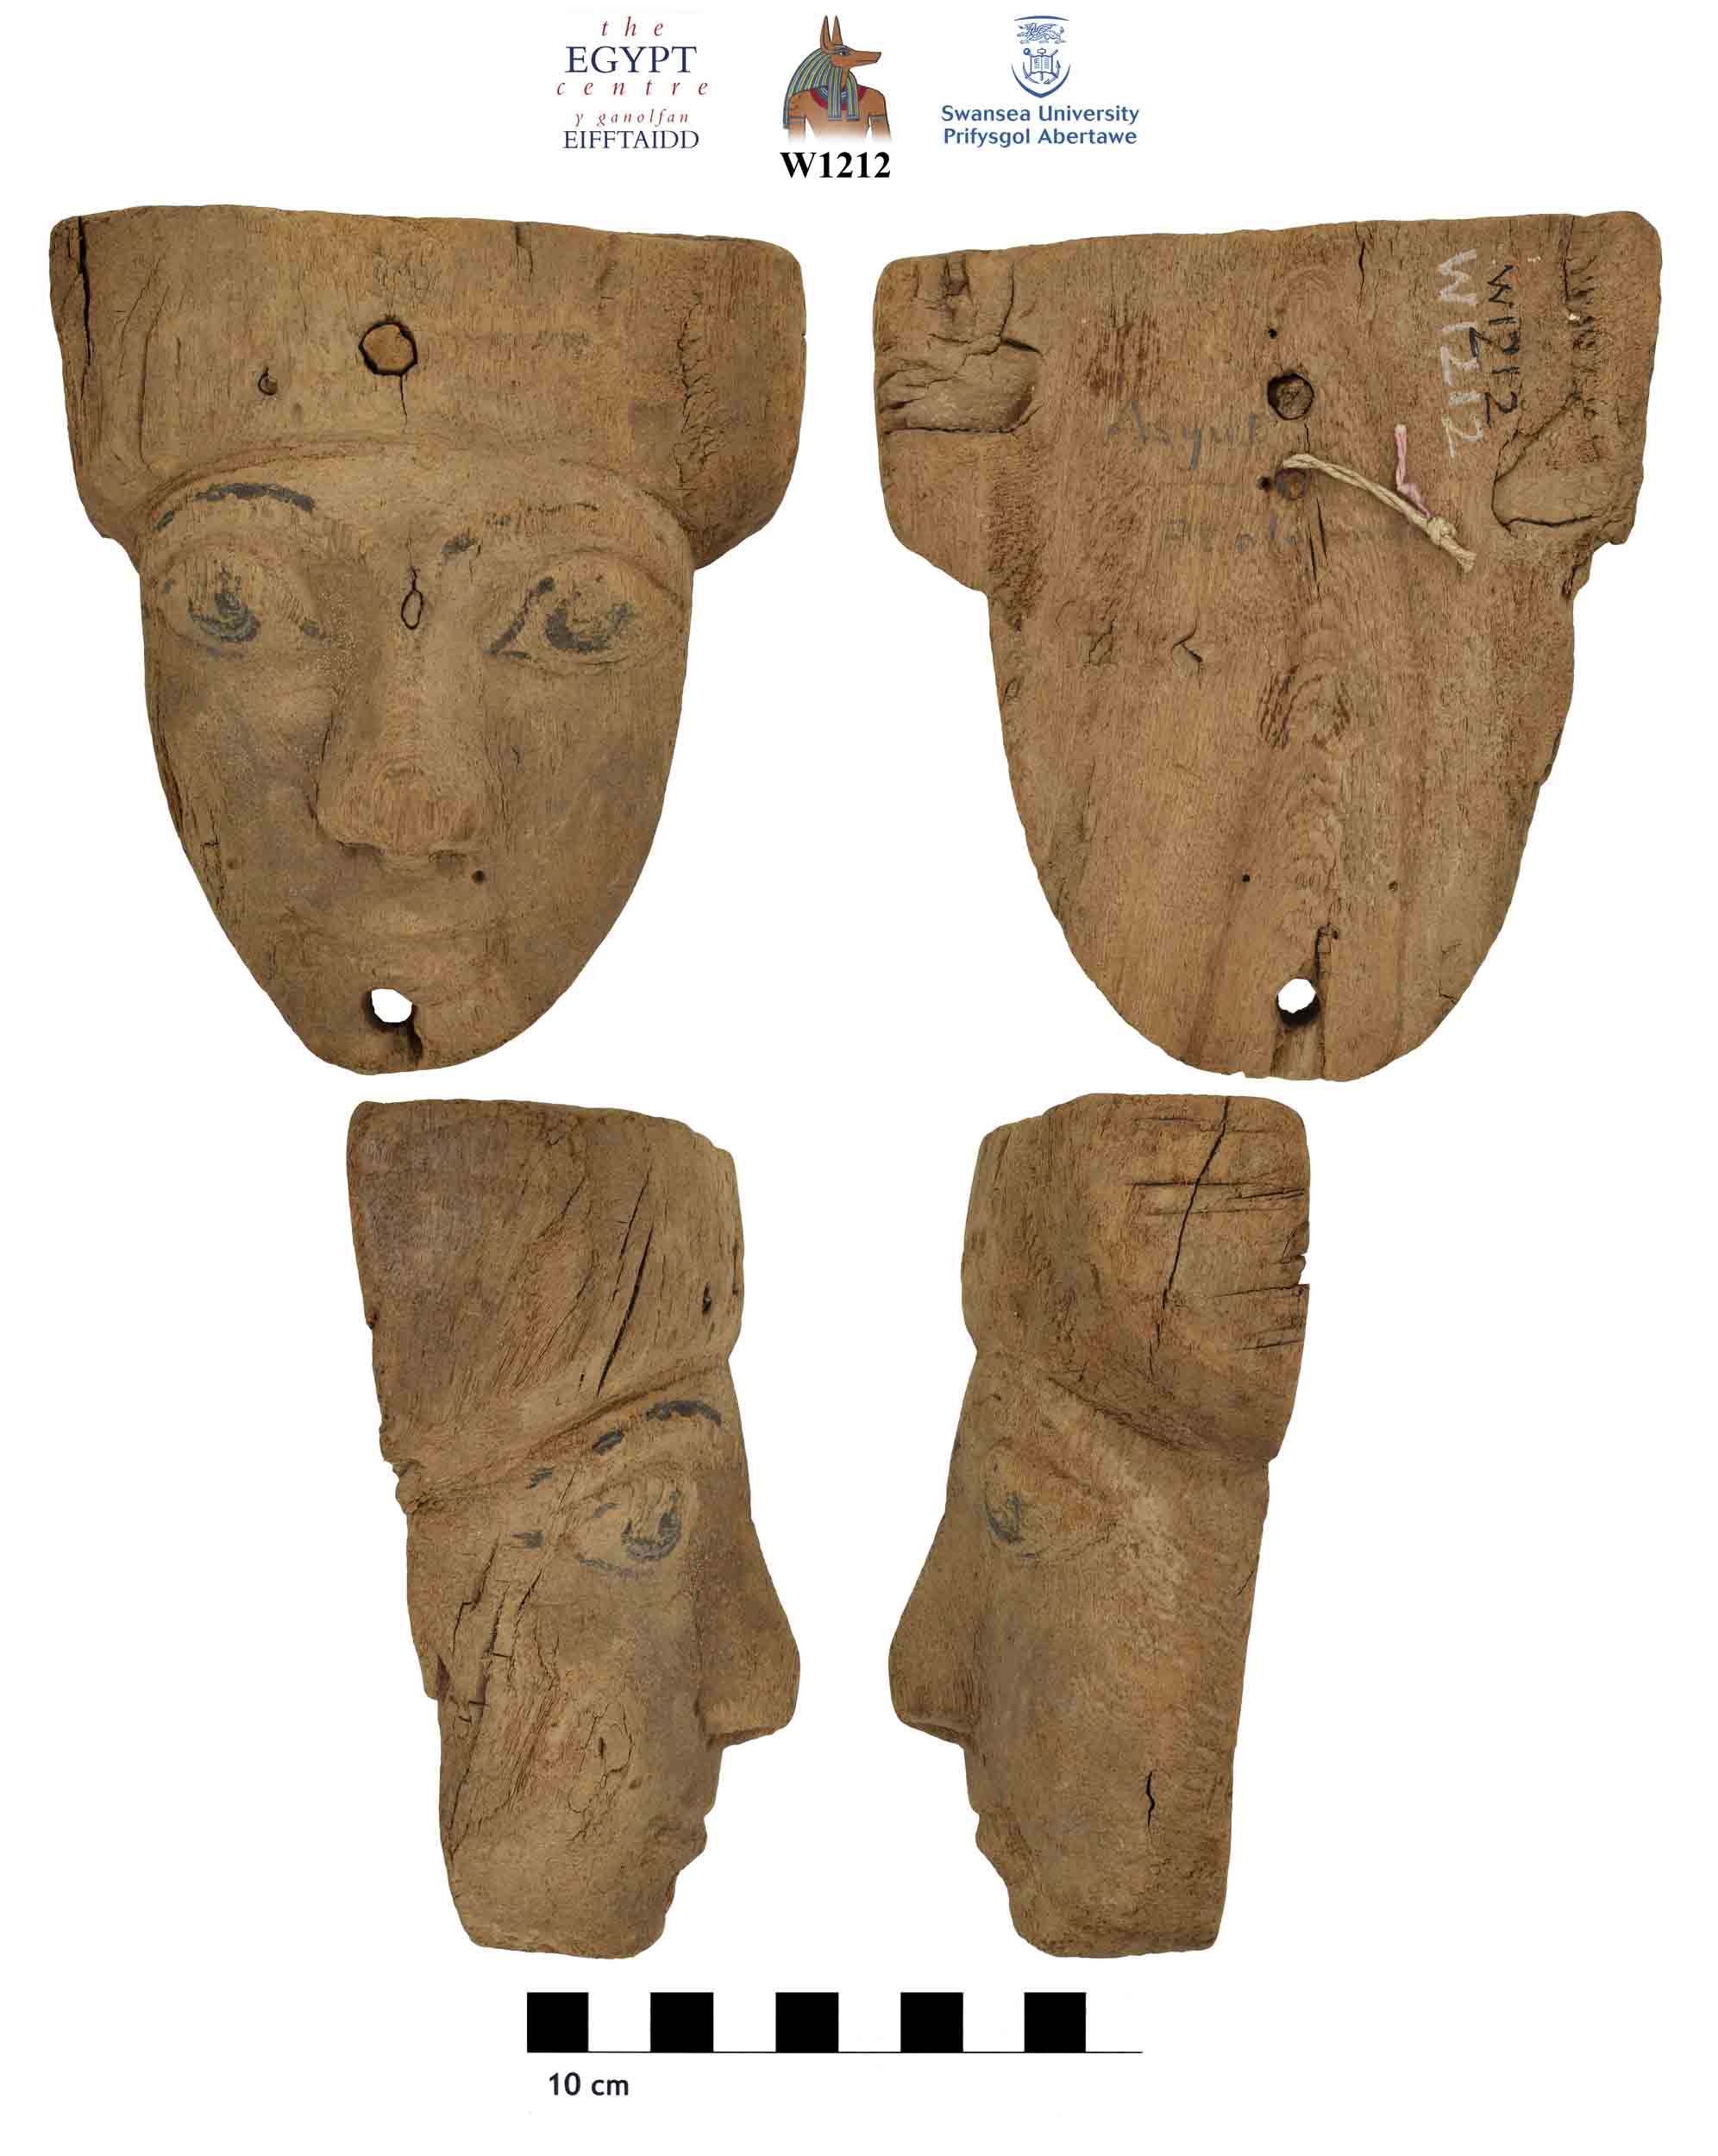 Image for: Wooden face from a coffin